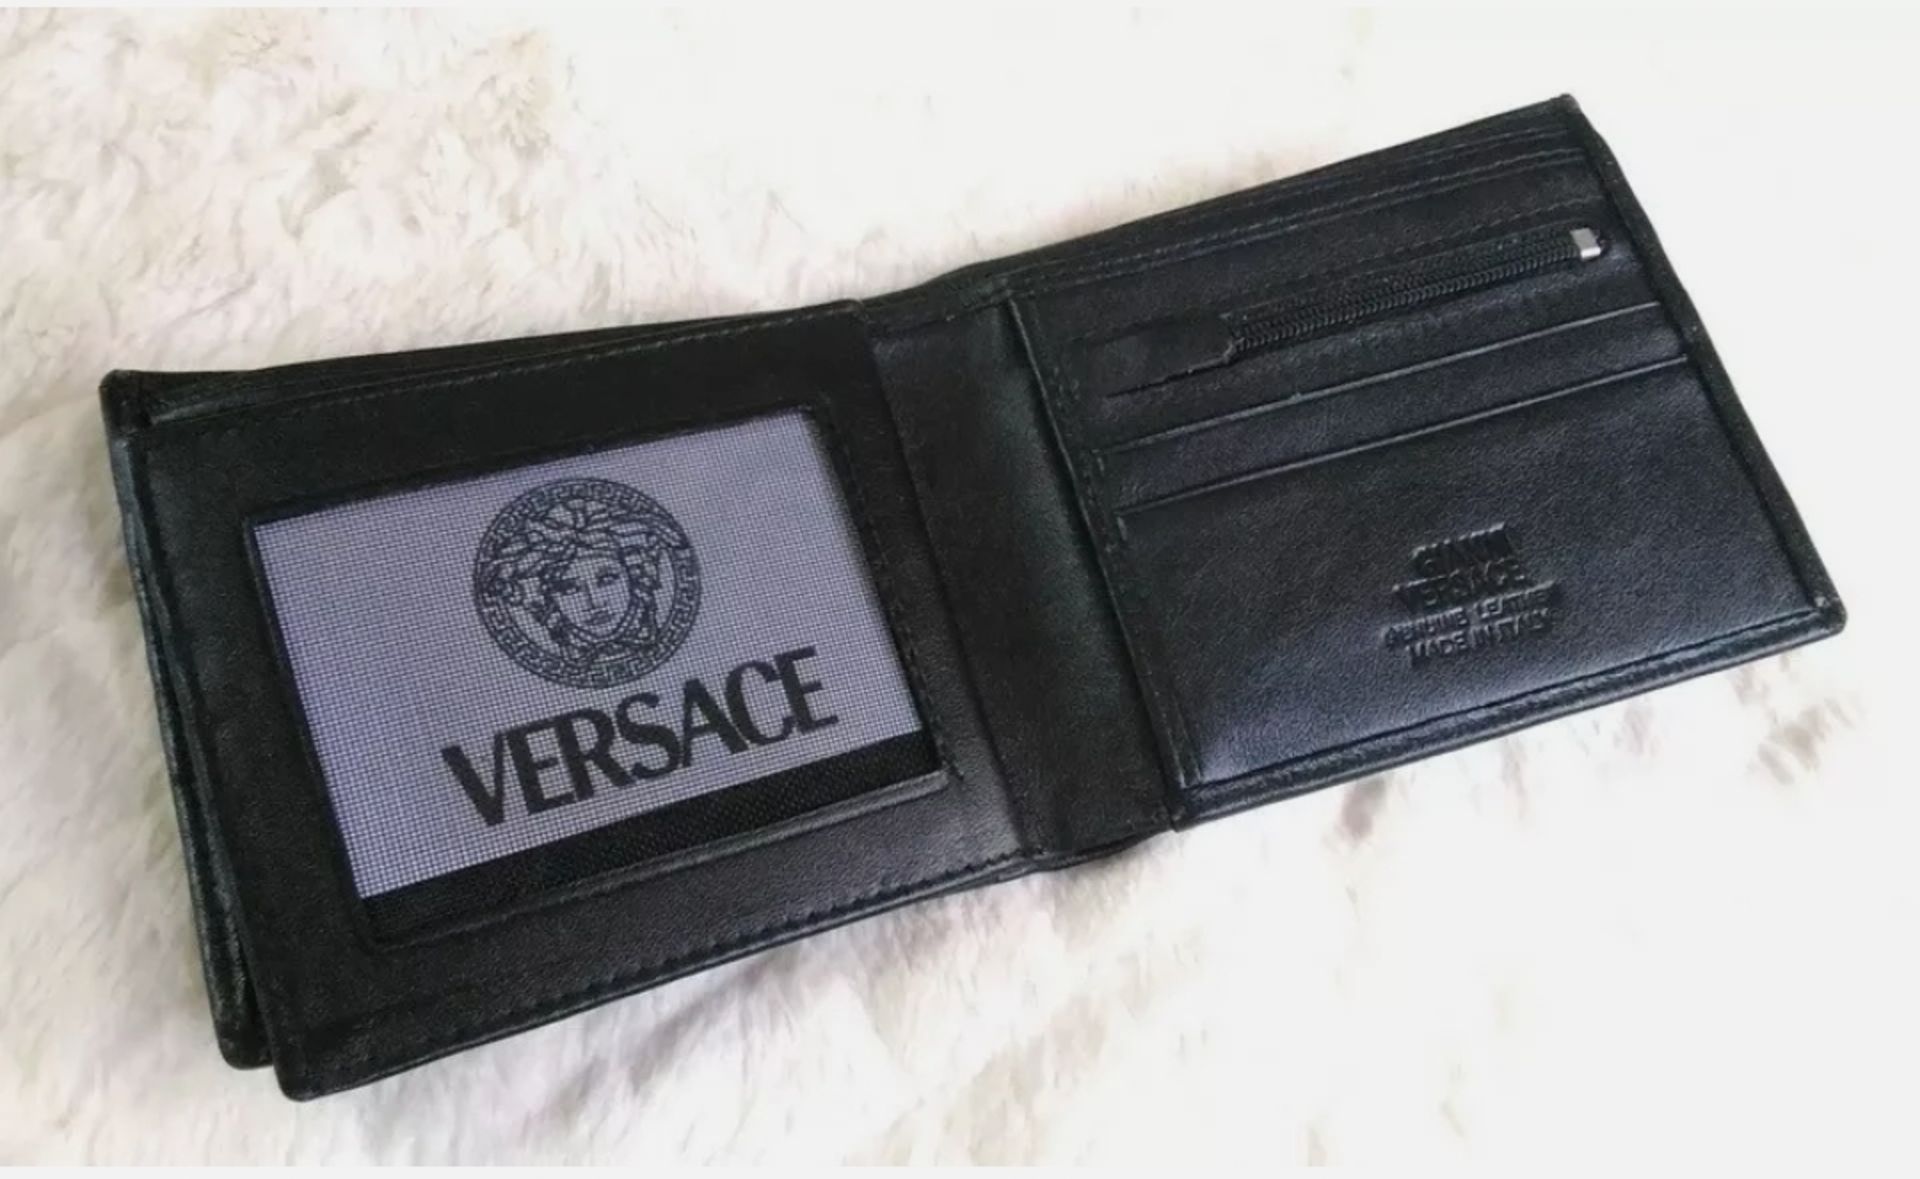 Versace Men's Leather Wallet - New With Box - Image 8 of 9